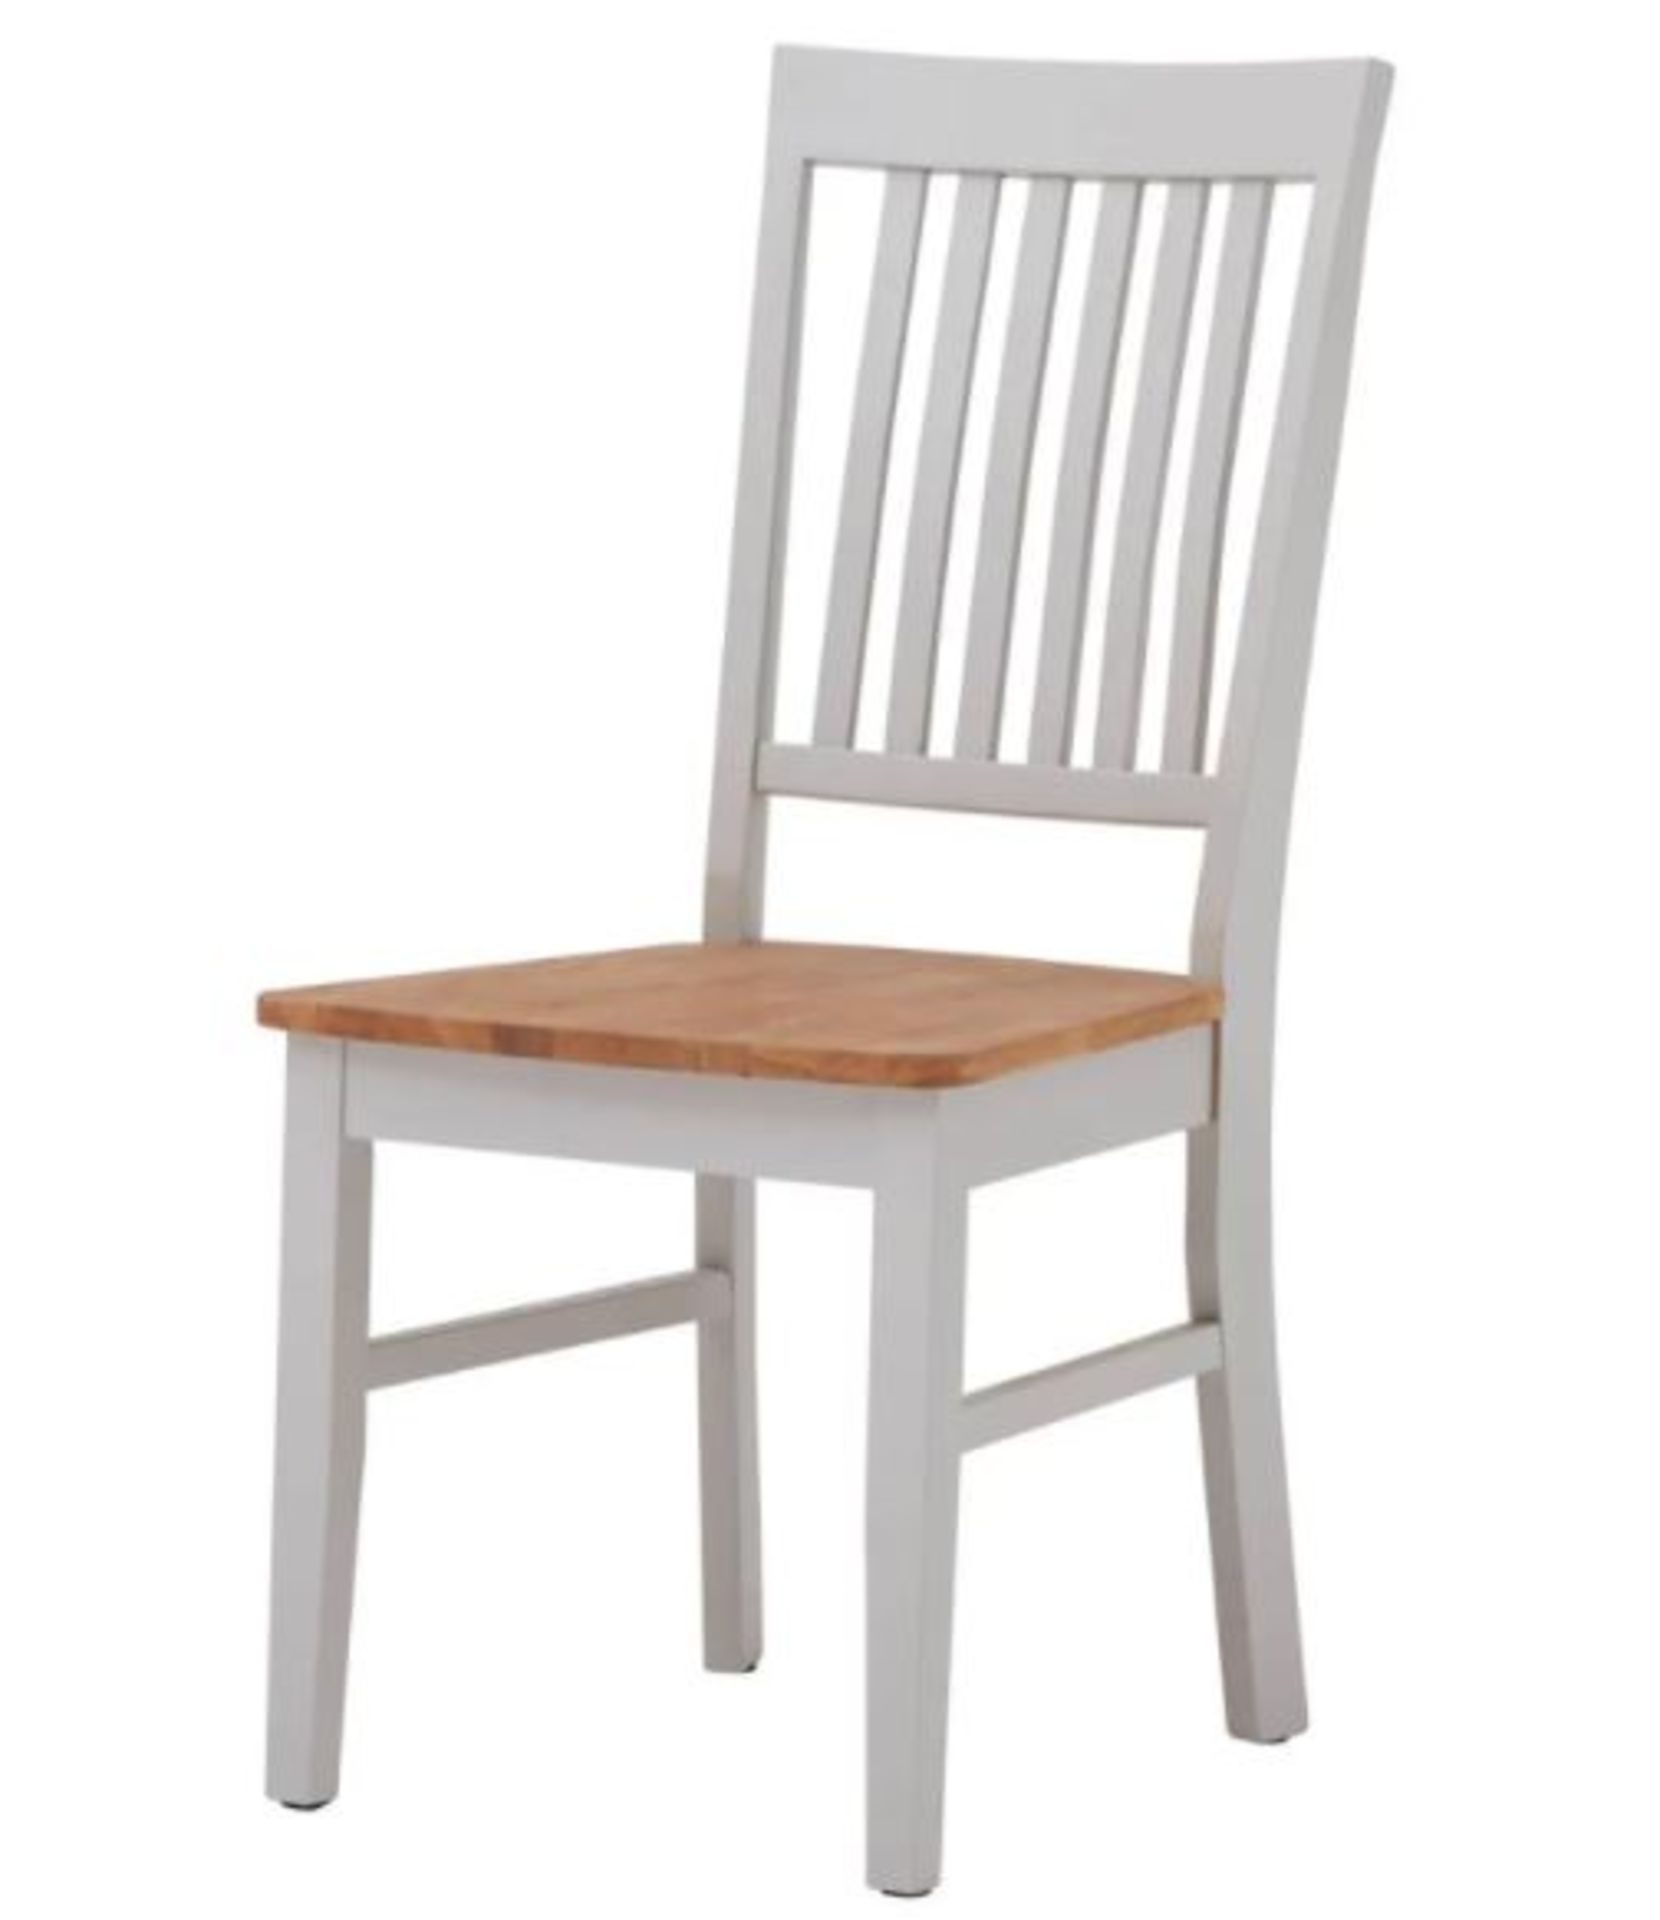 (R7M) 3x Henlow Dining Chairs RRP £150. Solid Oak Topped Chairs. (H95x W43.5x D59cm)